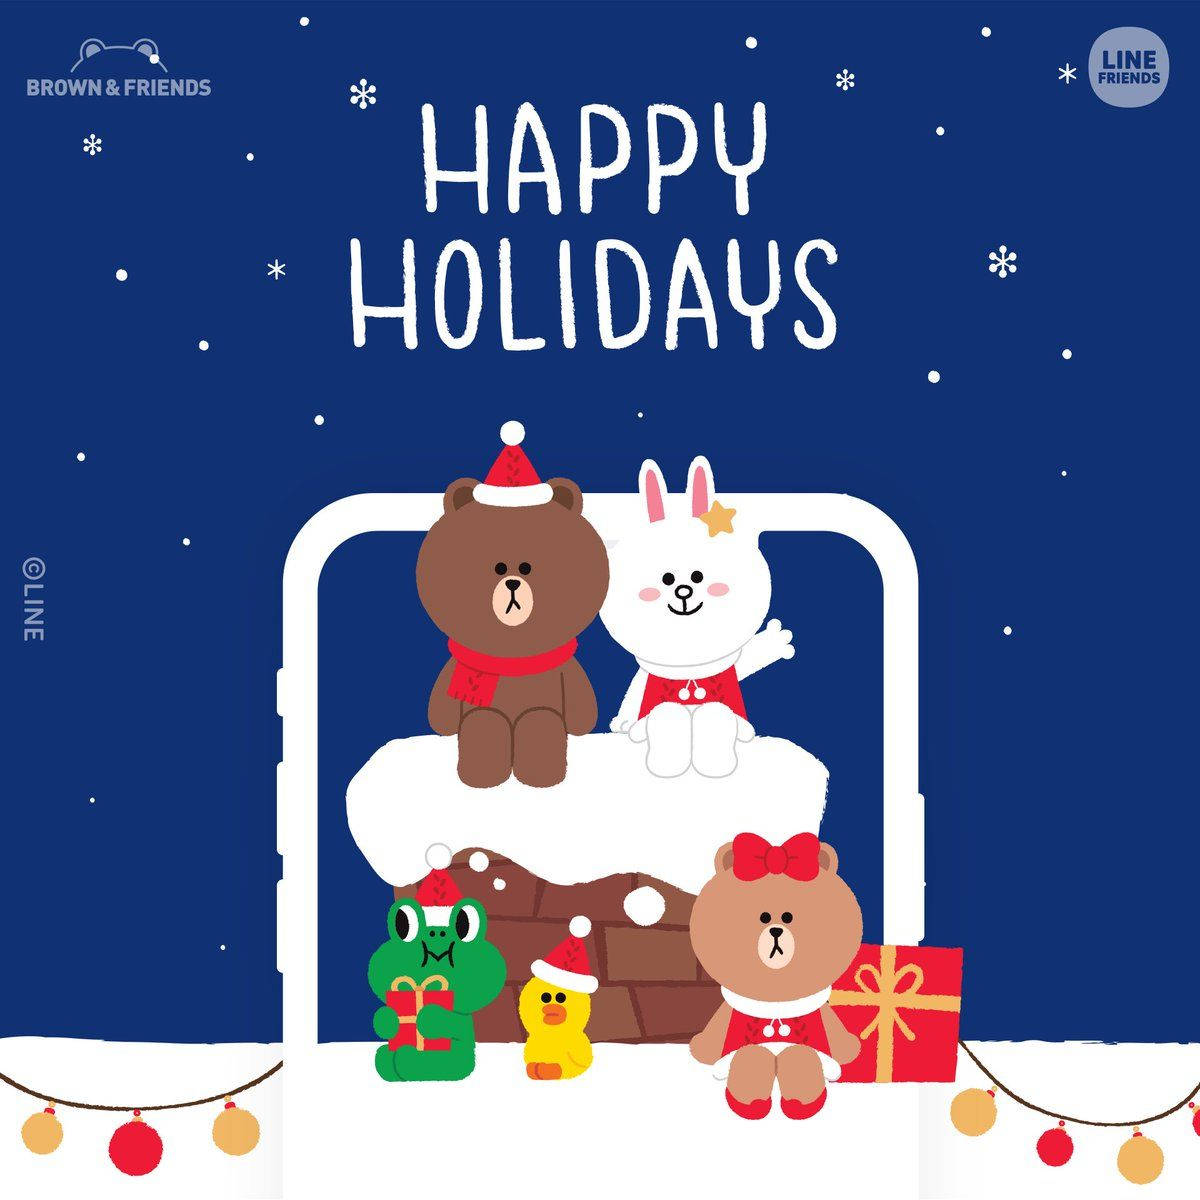 Line Friends Digital Holiday Card Background